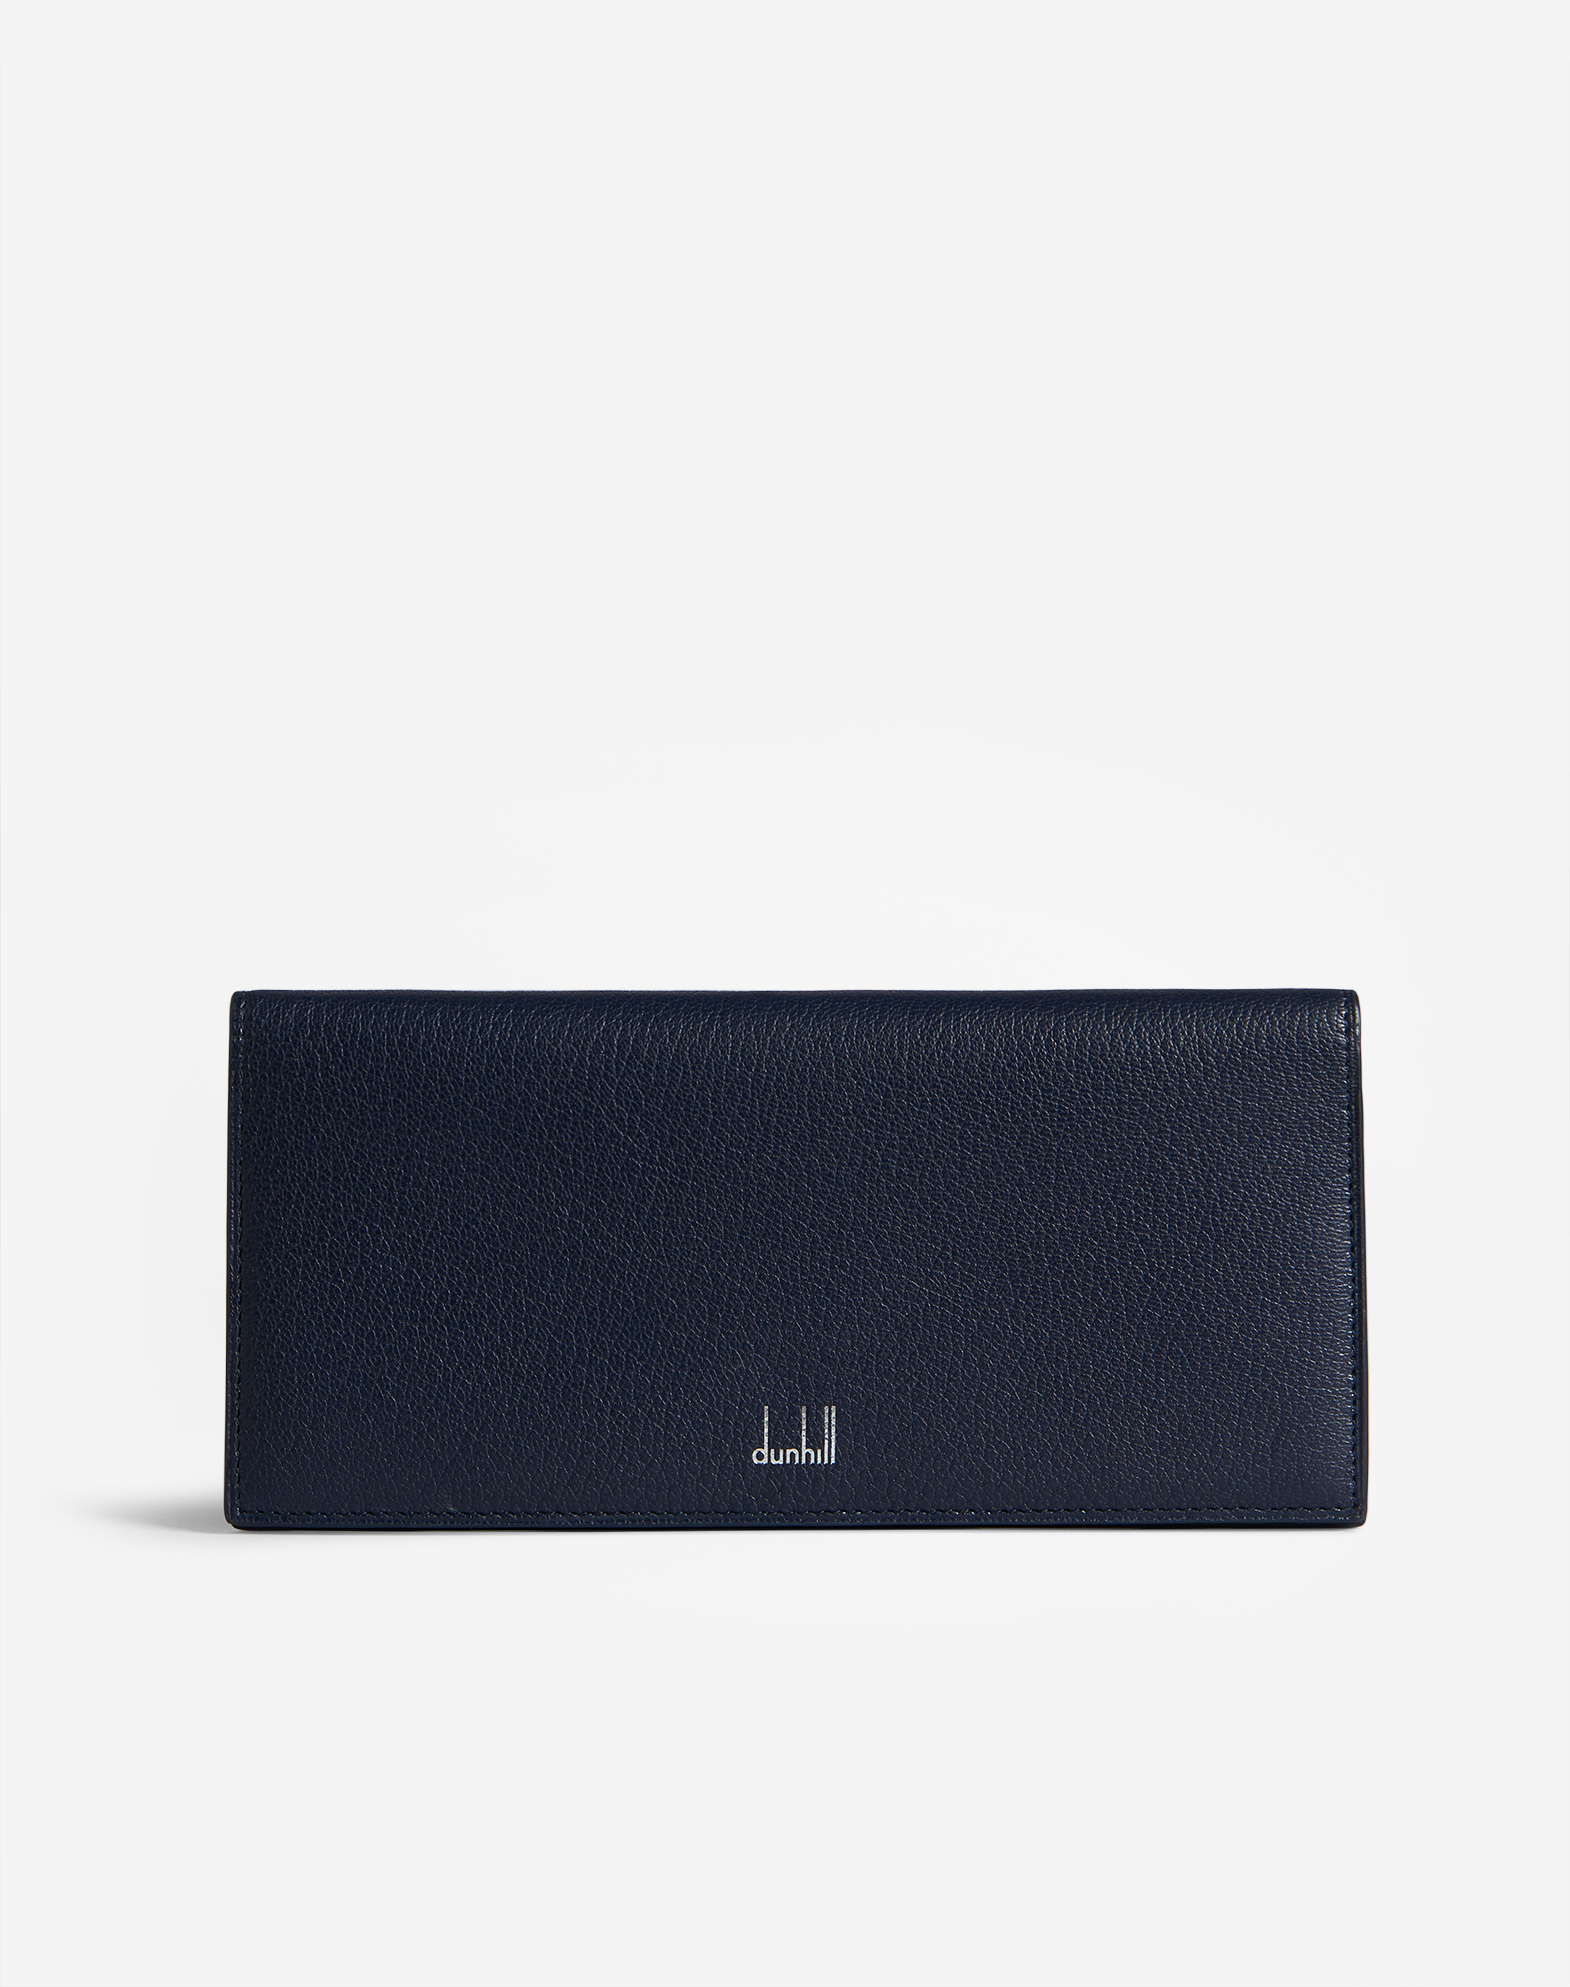 Dunhill Duke Fine Leather 10cc Coat Wallet In Navy